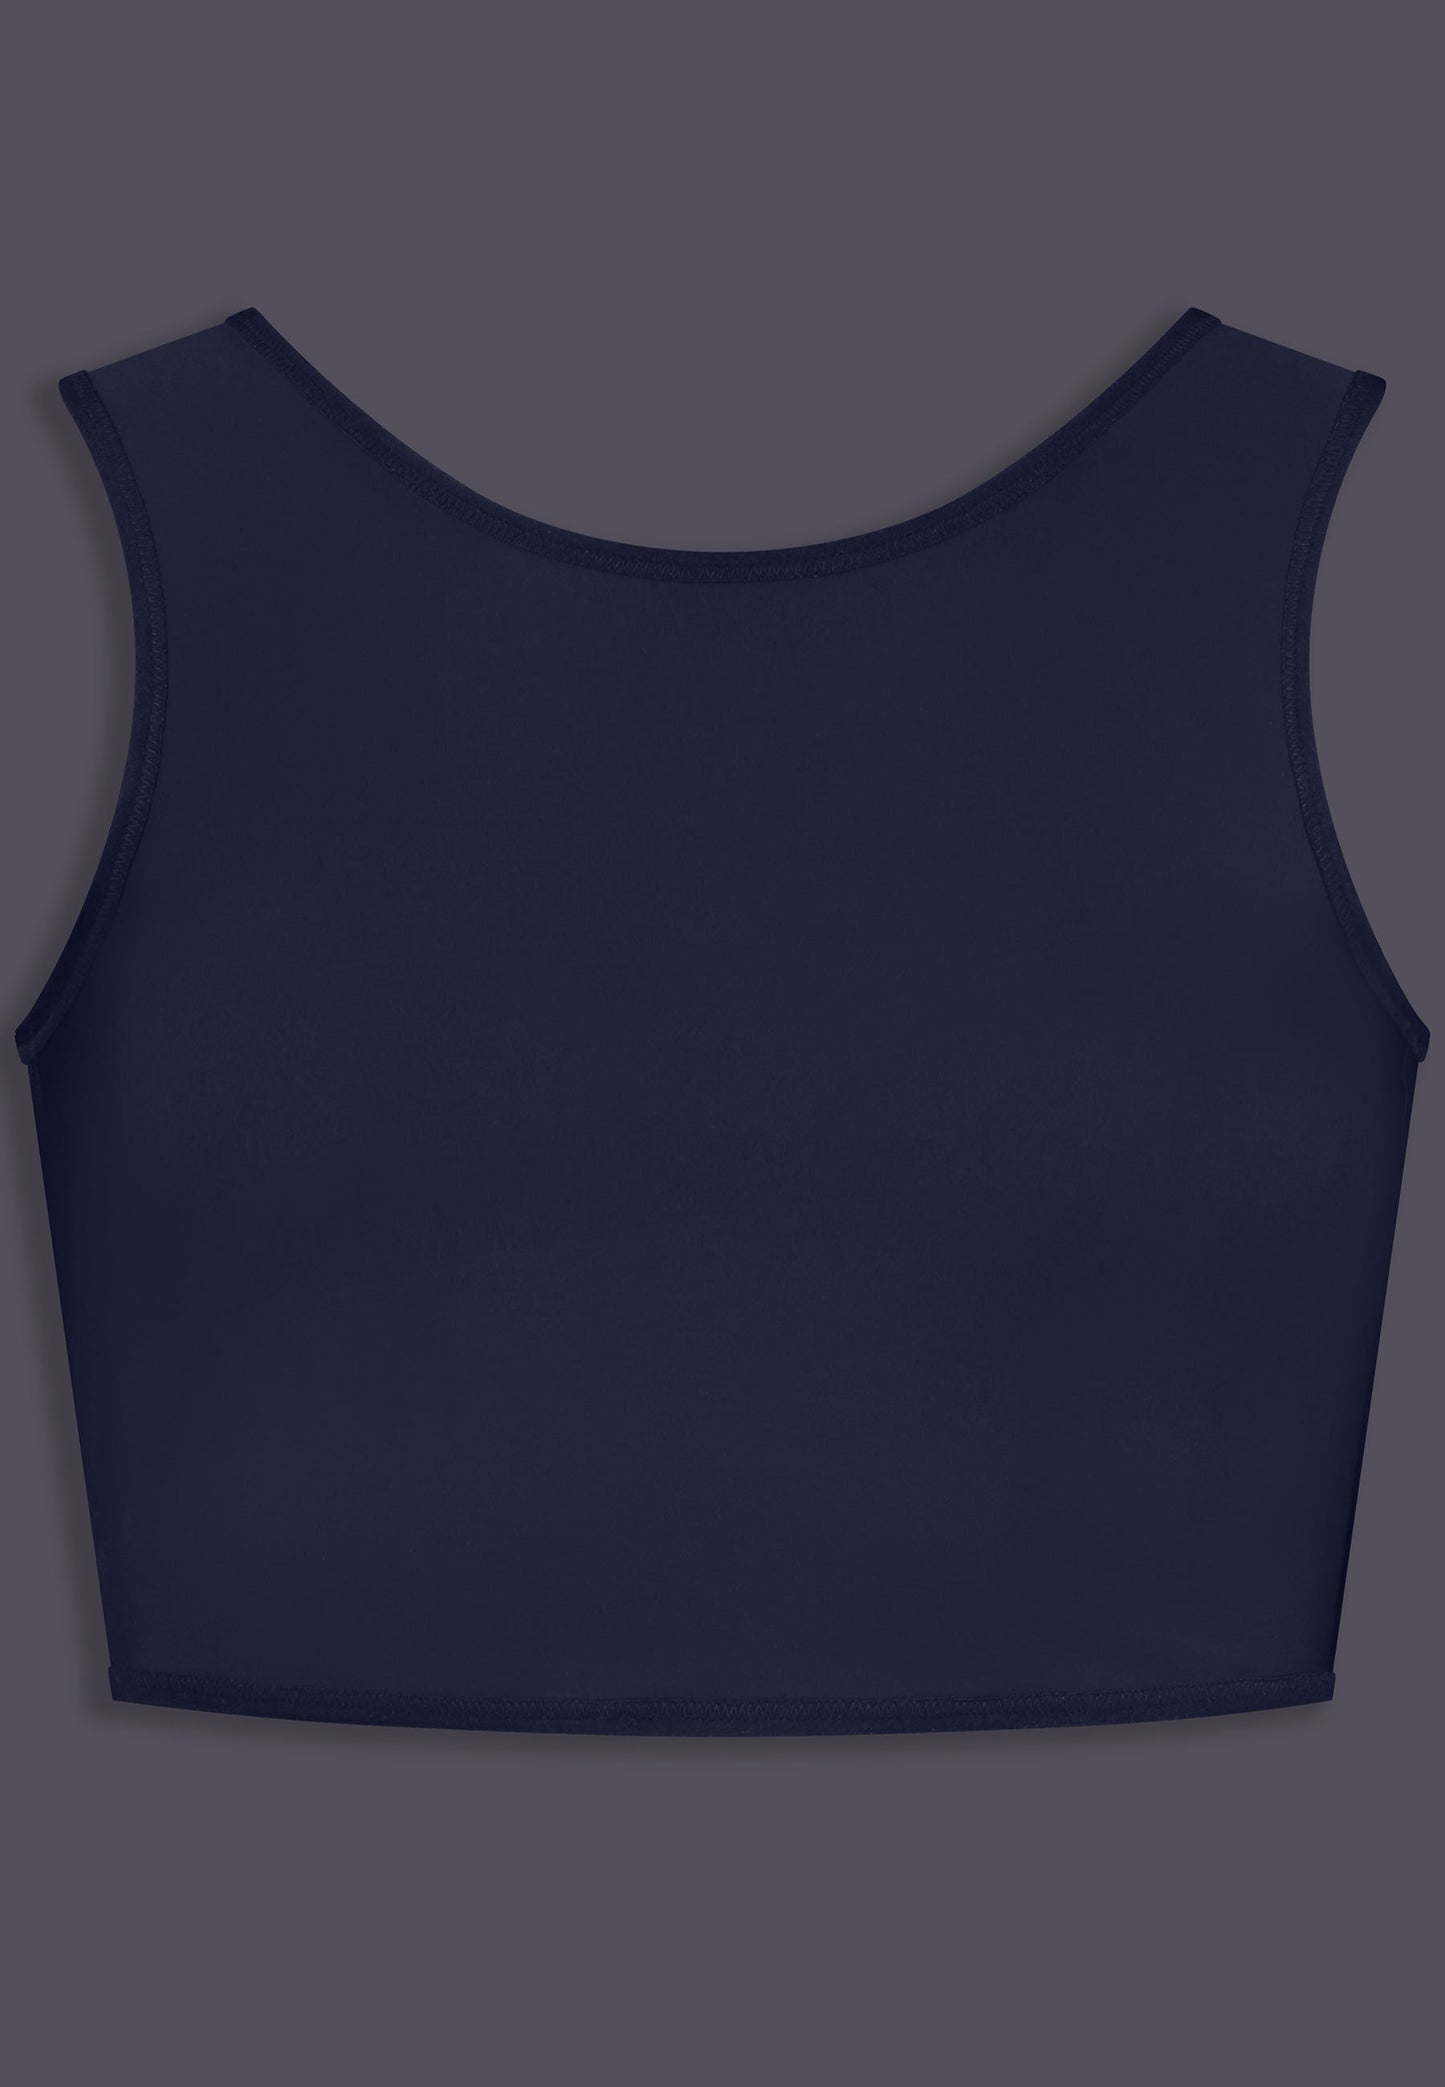 Gym Binder dark blue extra strong front view